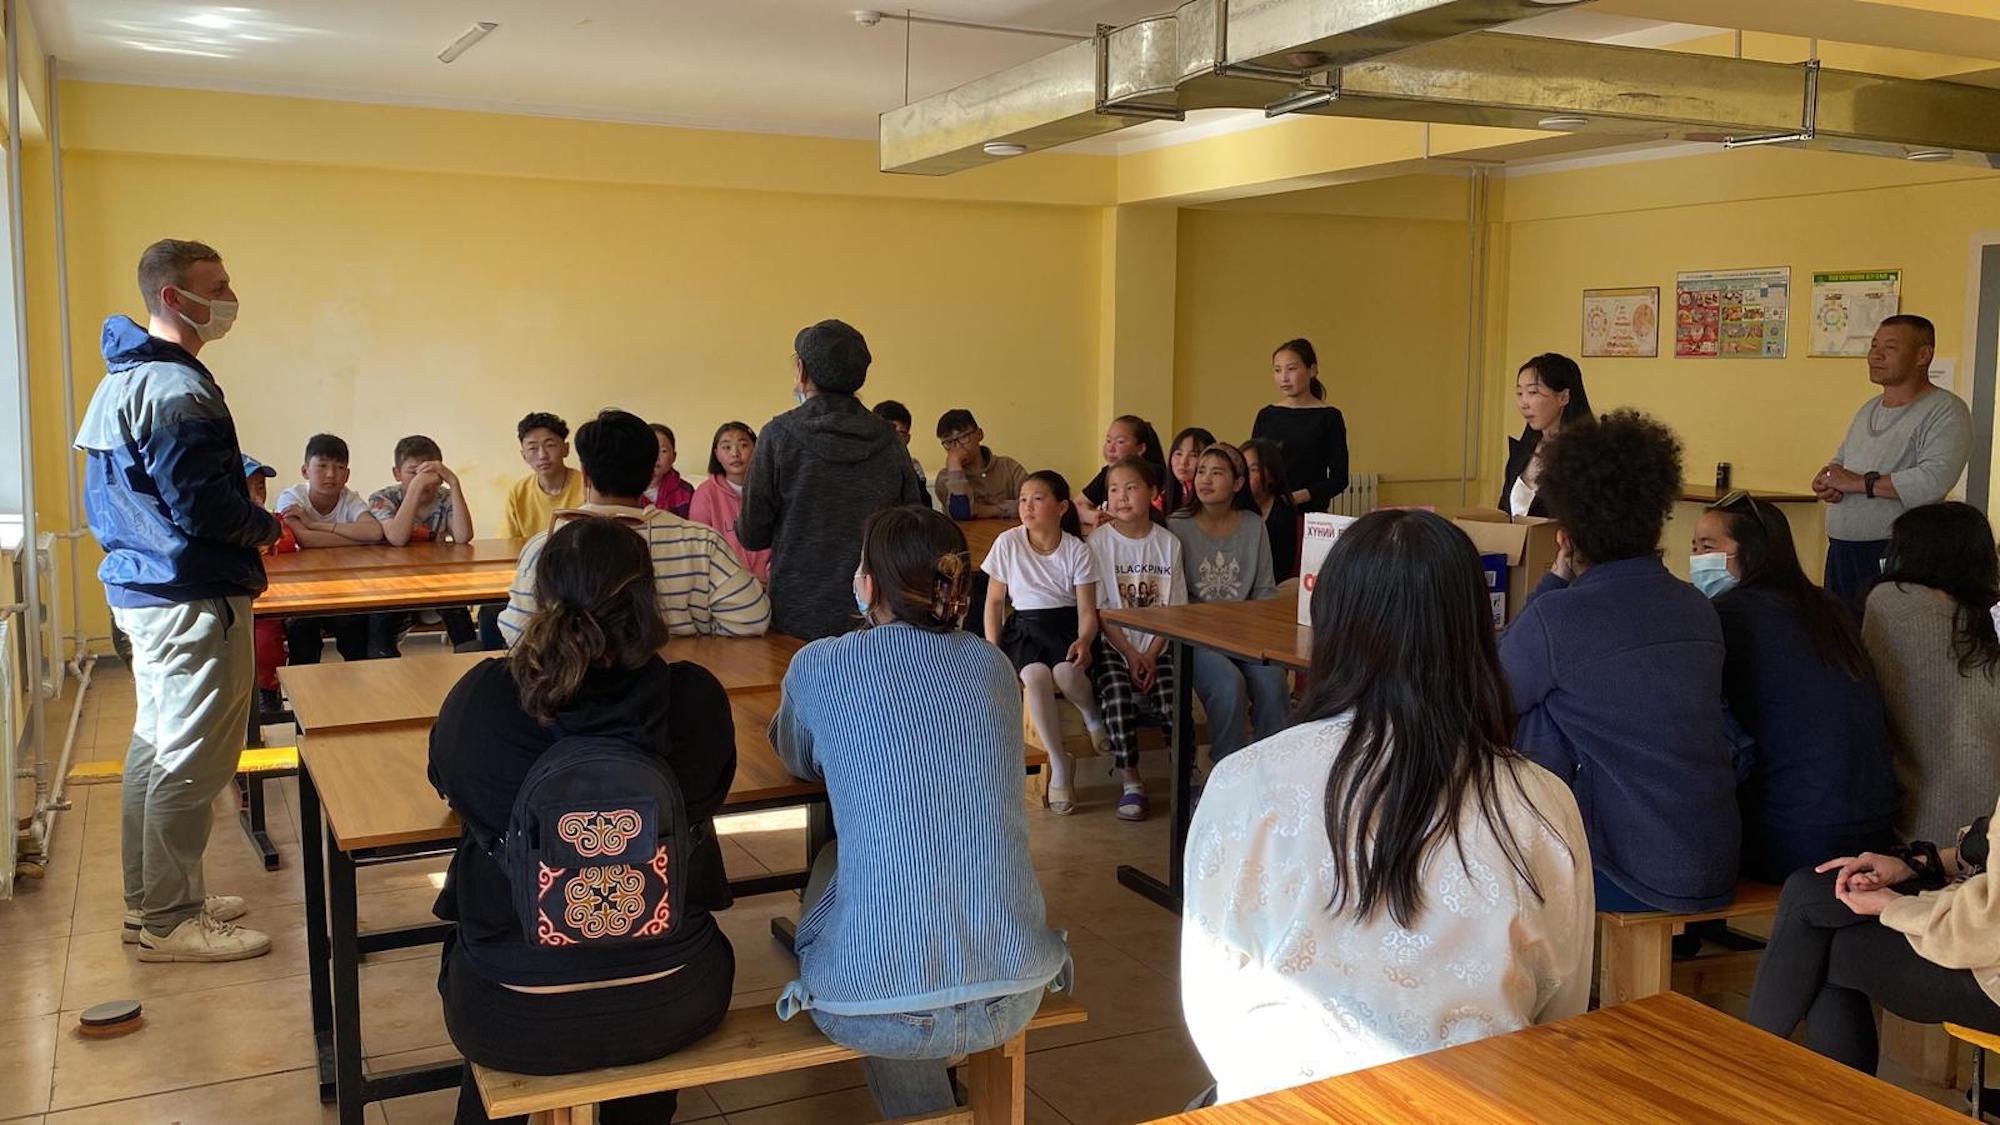 Penn students chat with children at a boarding school in Mongolia